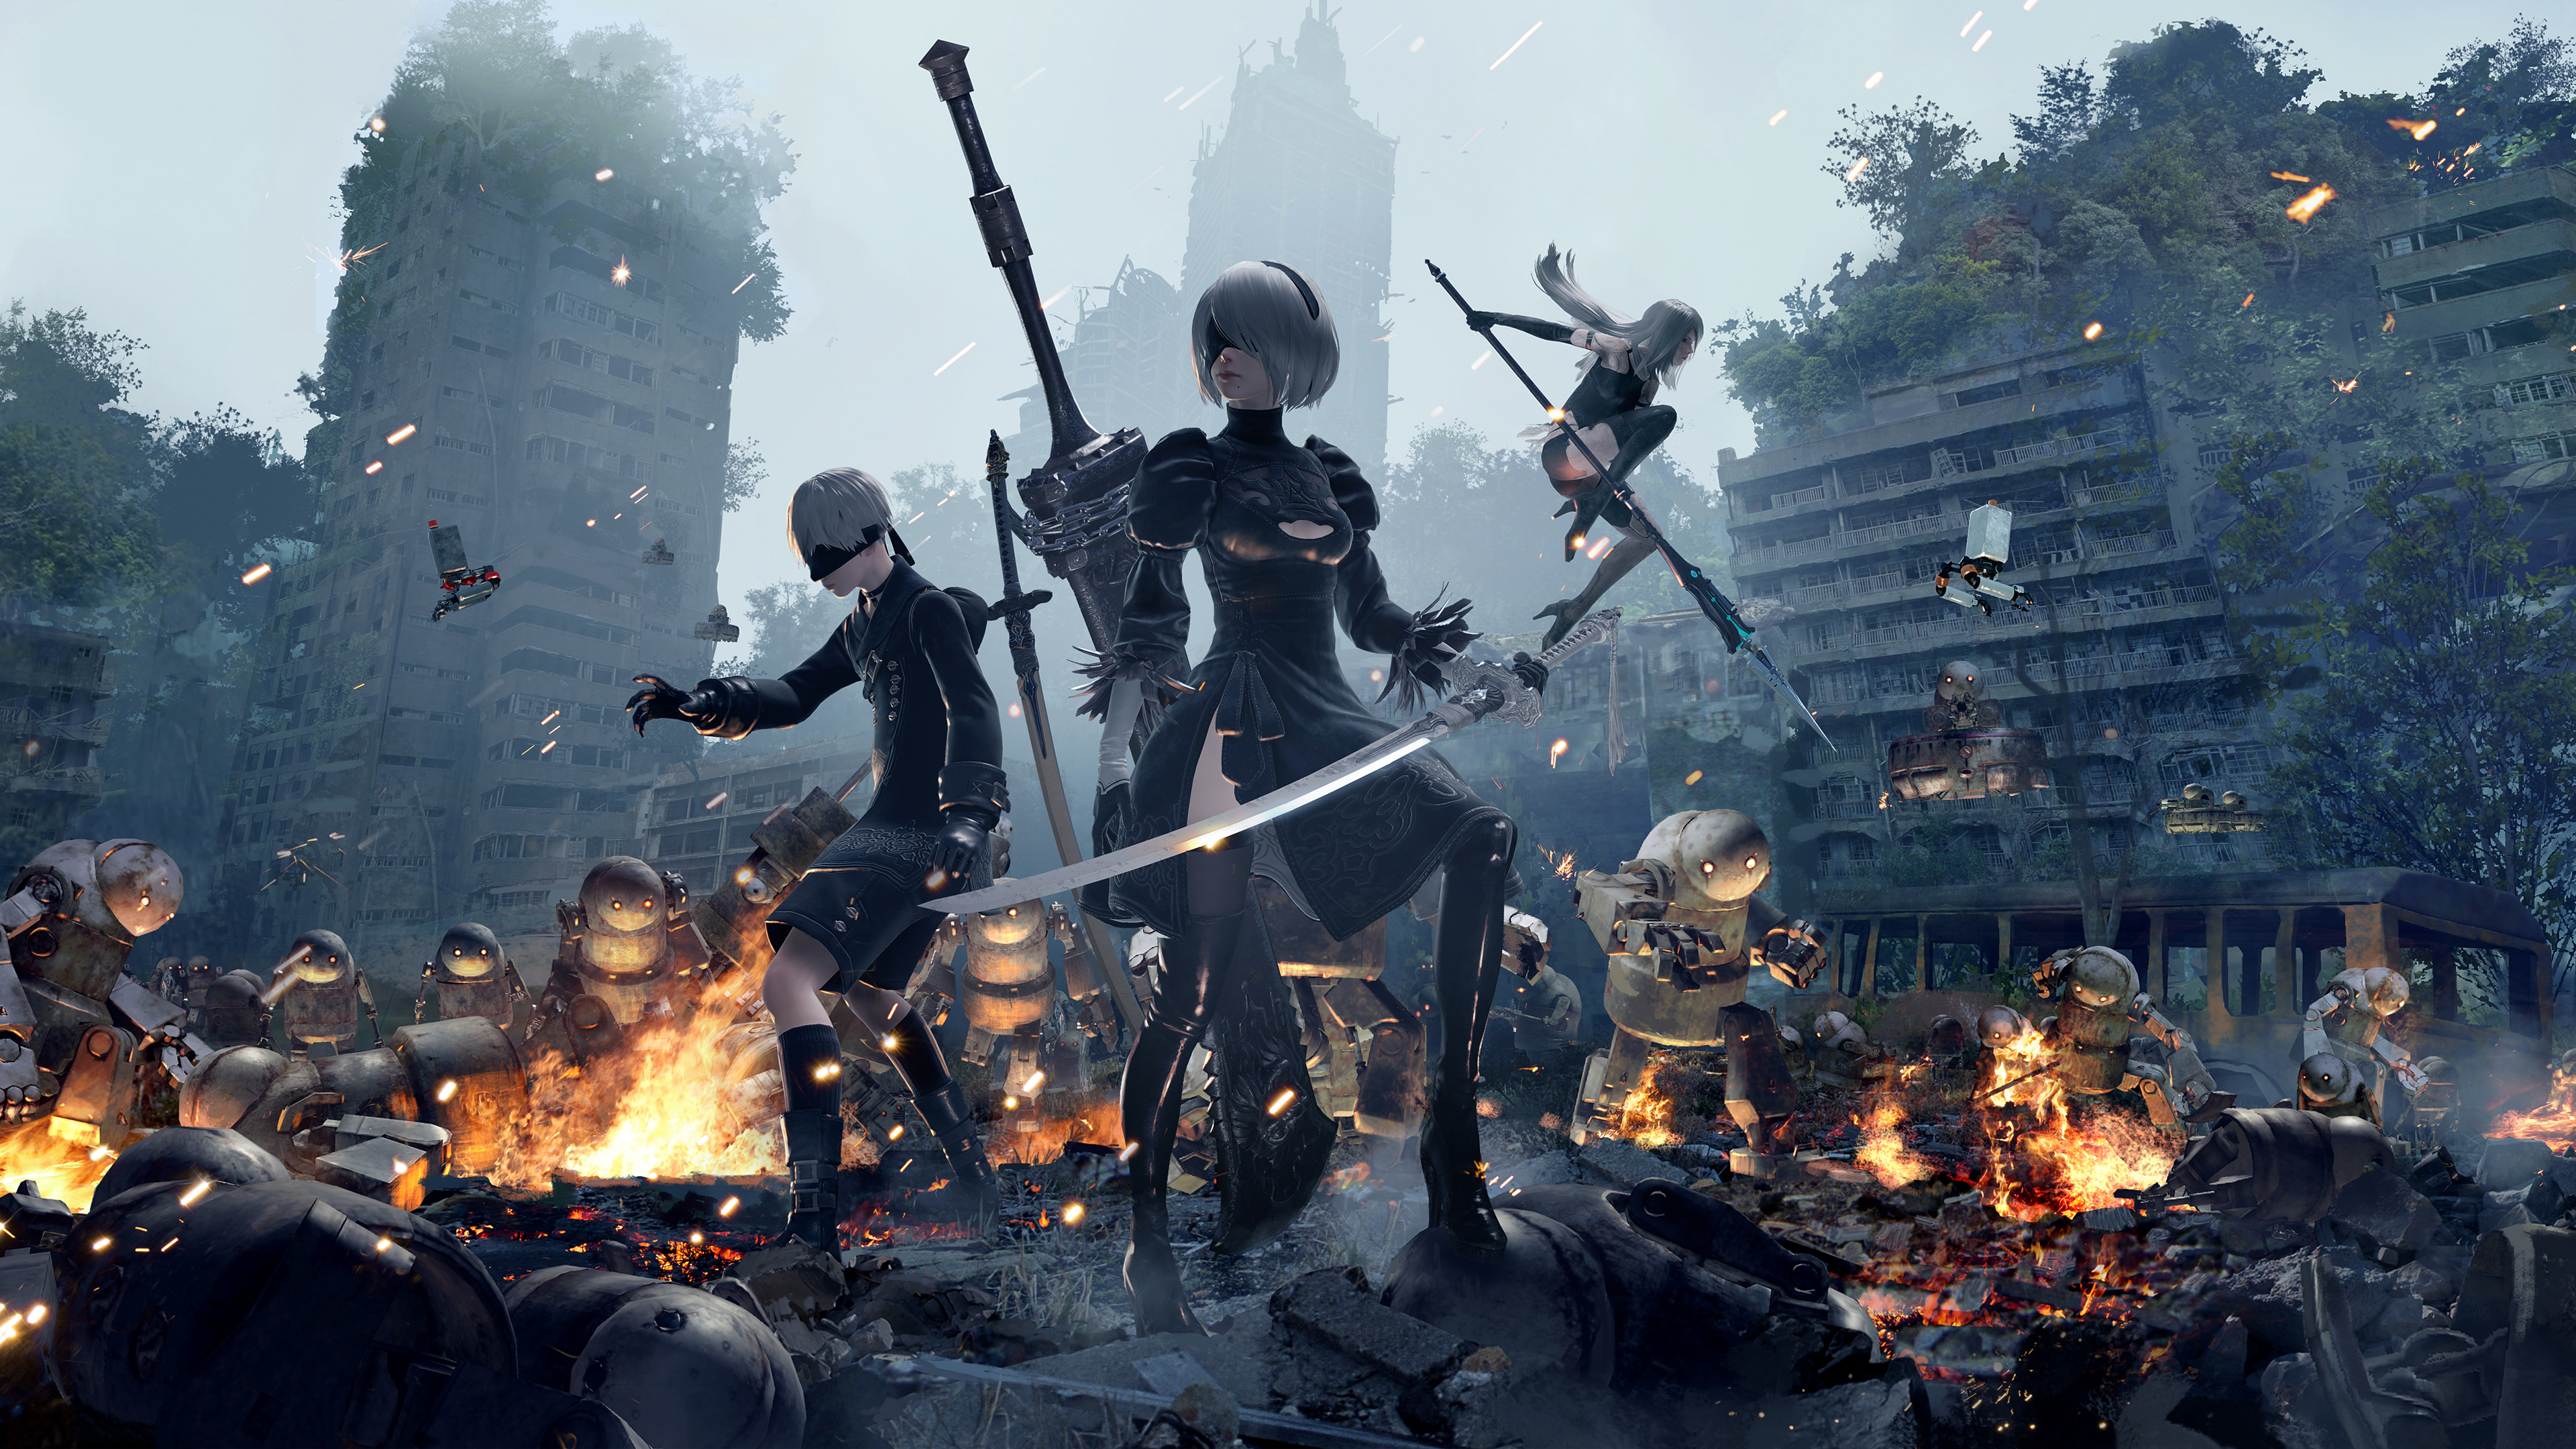 nier automata wallpaper,action adventure game,strategy video game,pc game,rebellion,battle